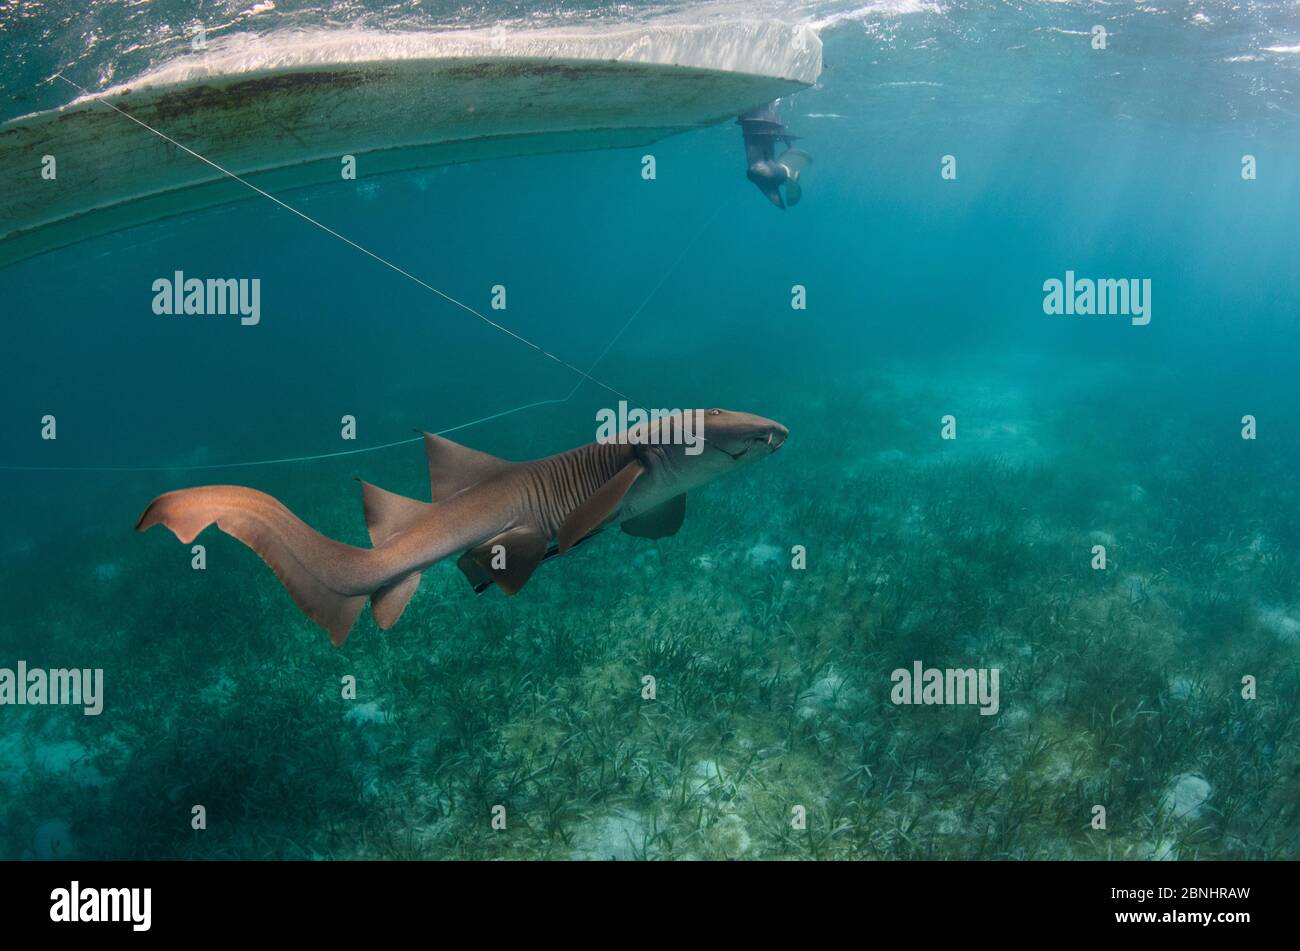 Nurse shark (Ginglymostoma cirratum) caught with hook for research by MAR Alliance, Lighthouse Reef Atoll, Belize. May 2015. Stock Photo